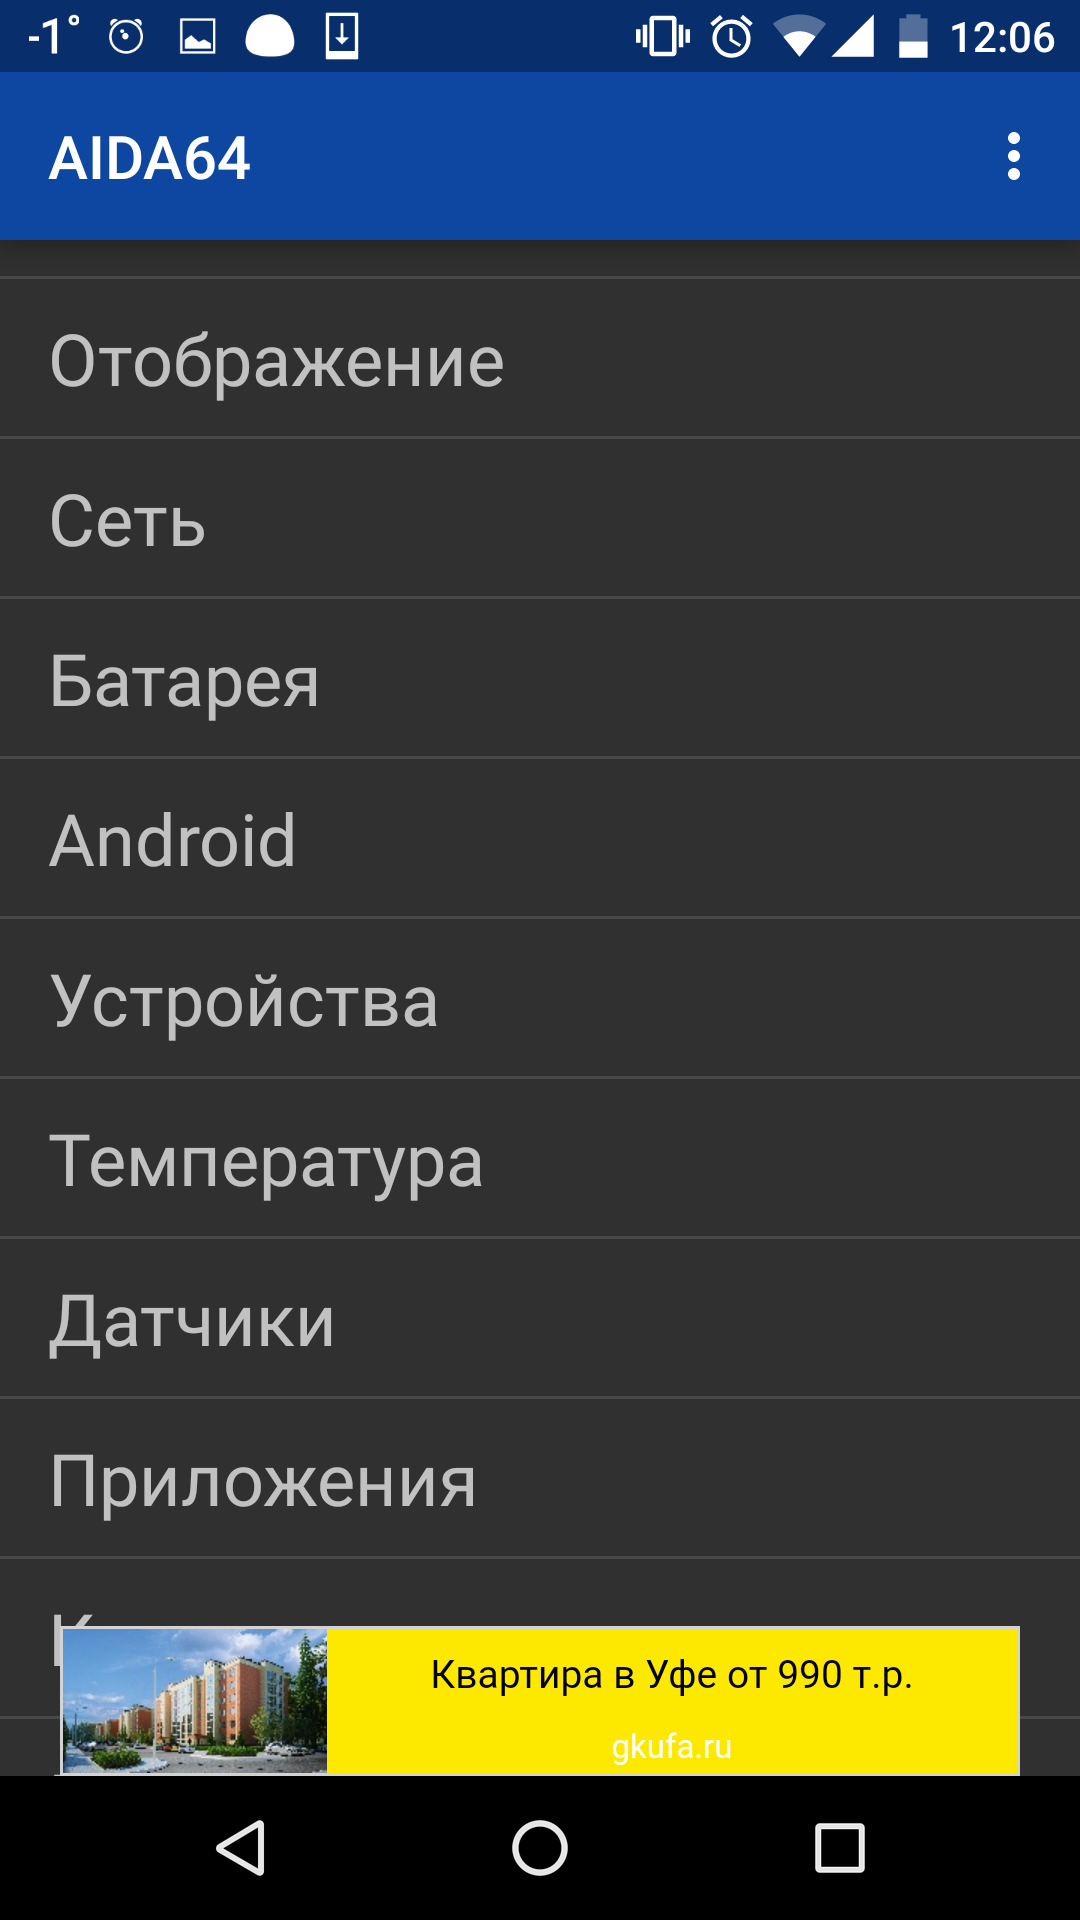 Applications for analyzing Android devices